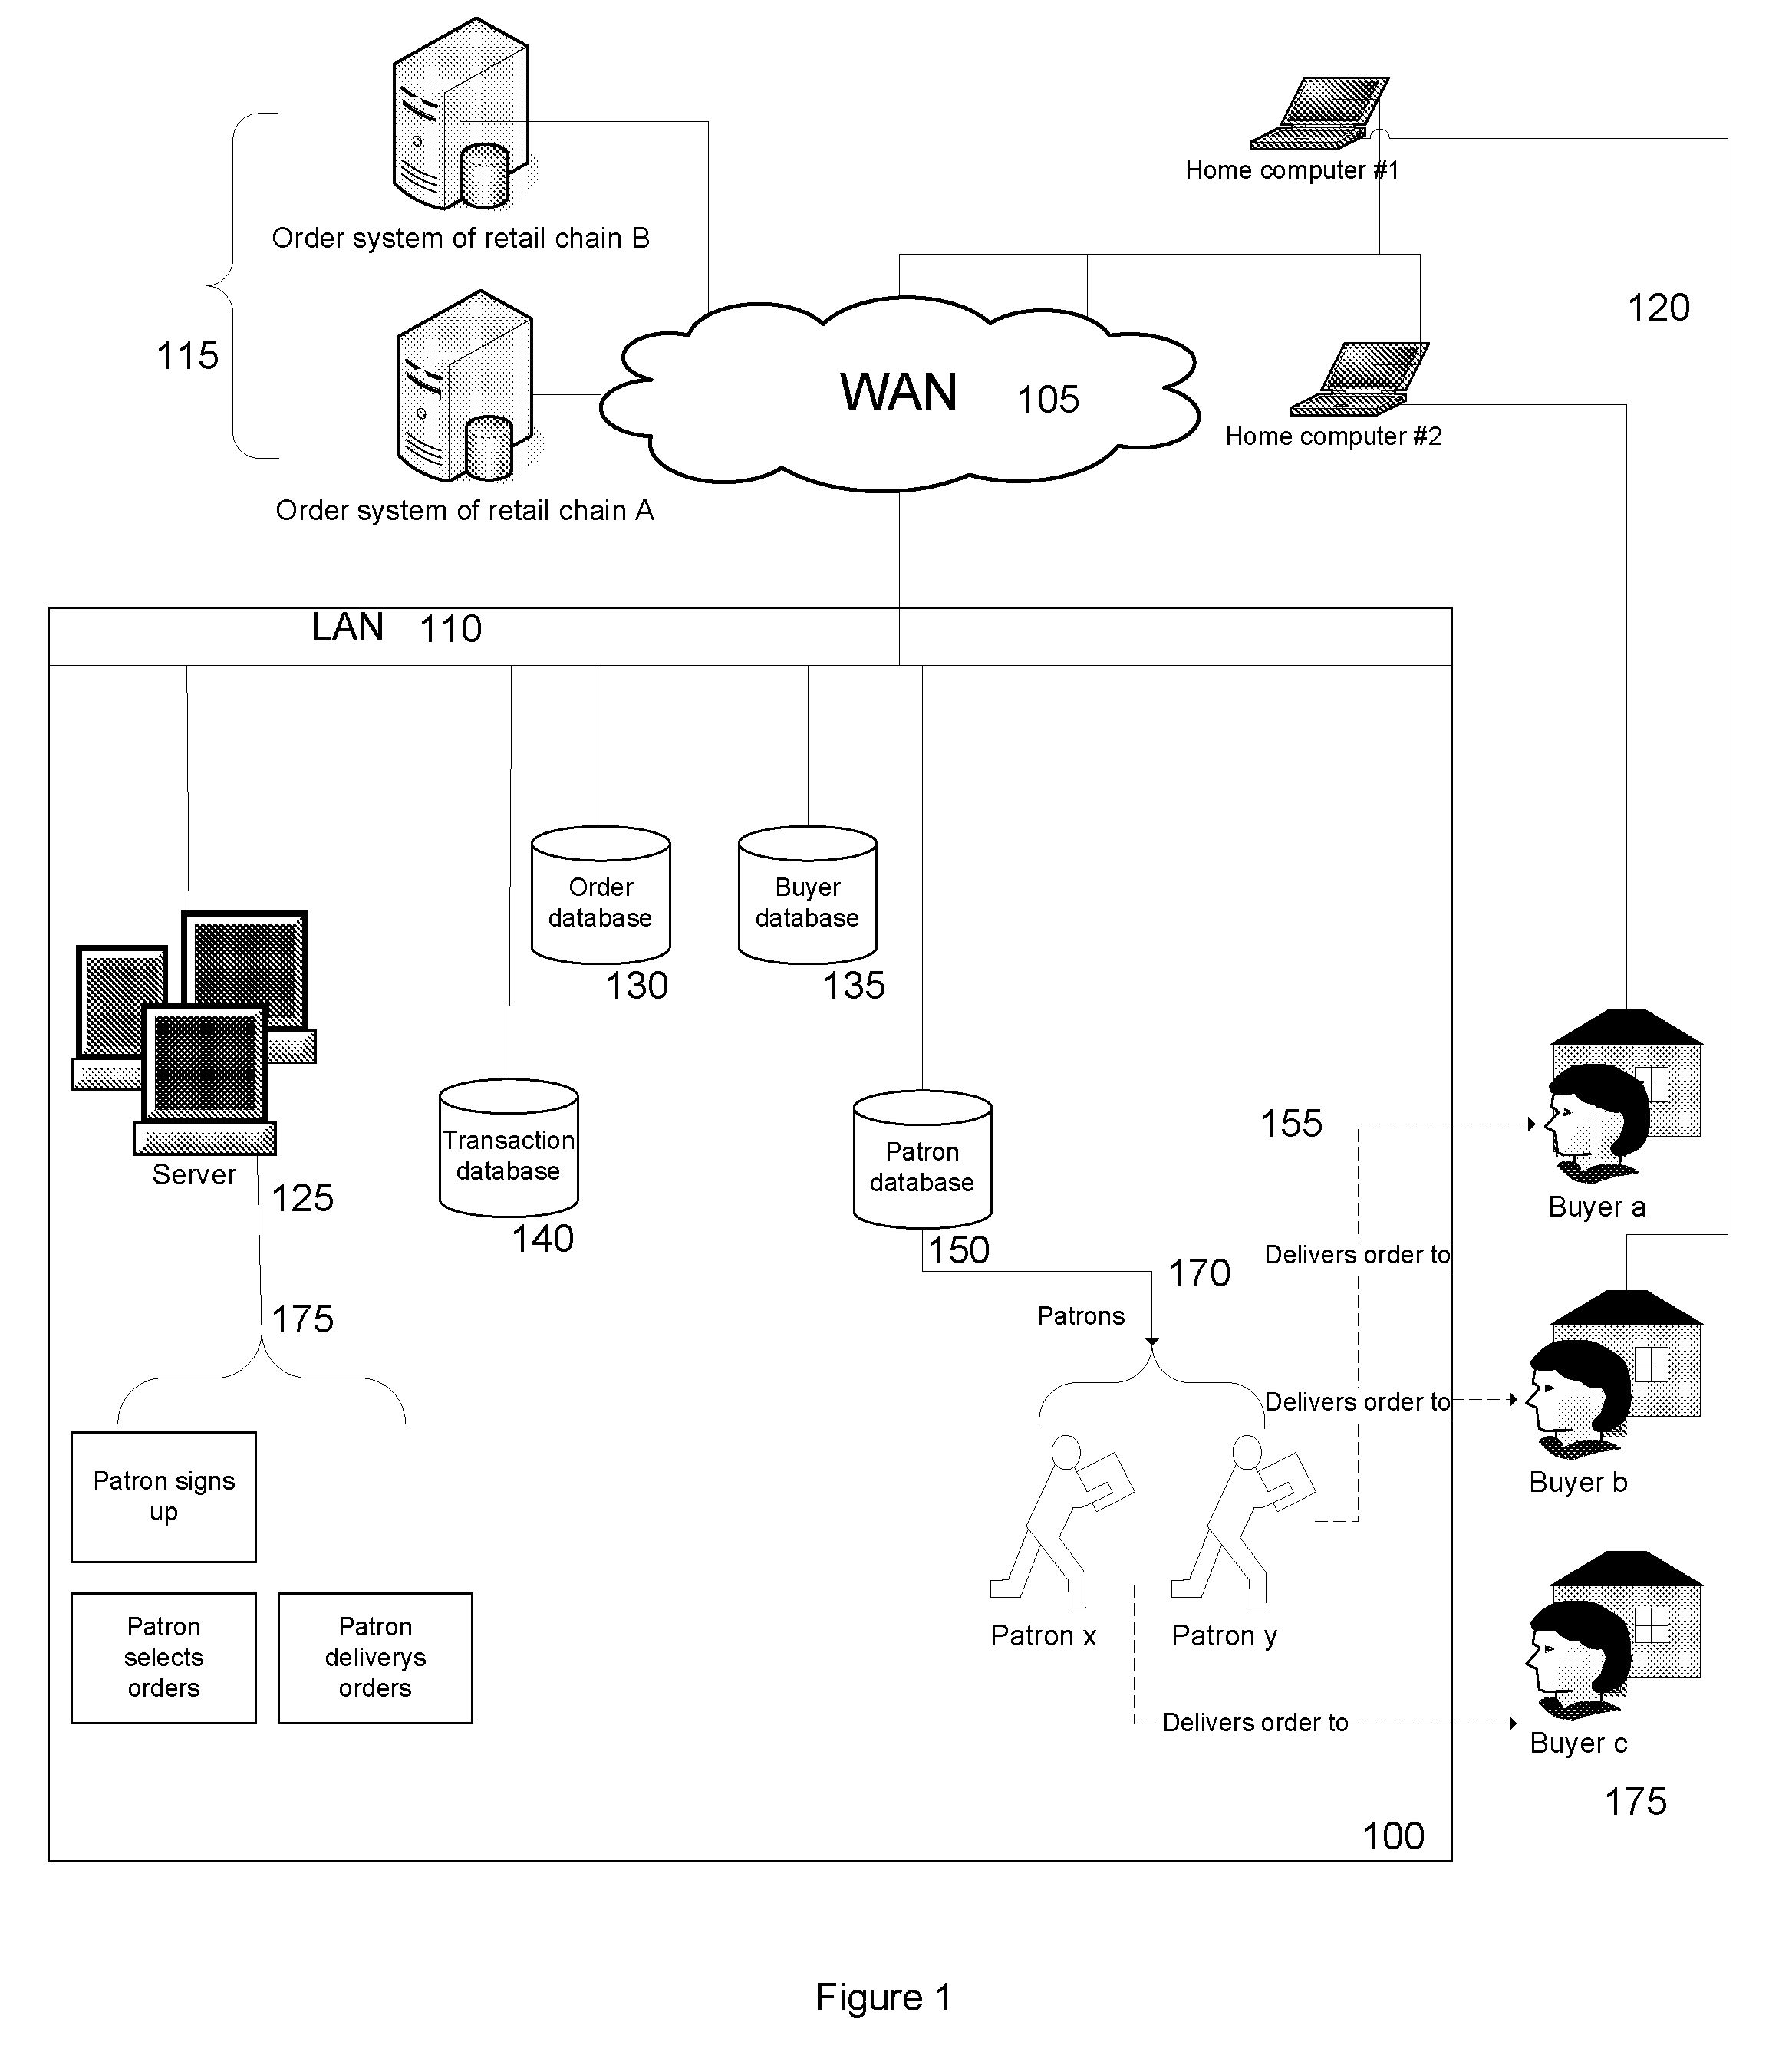 Method and apparatus for the home delivery of local retail e-commerce orders